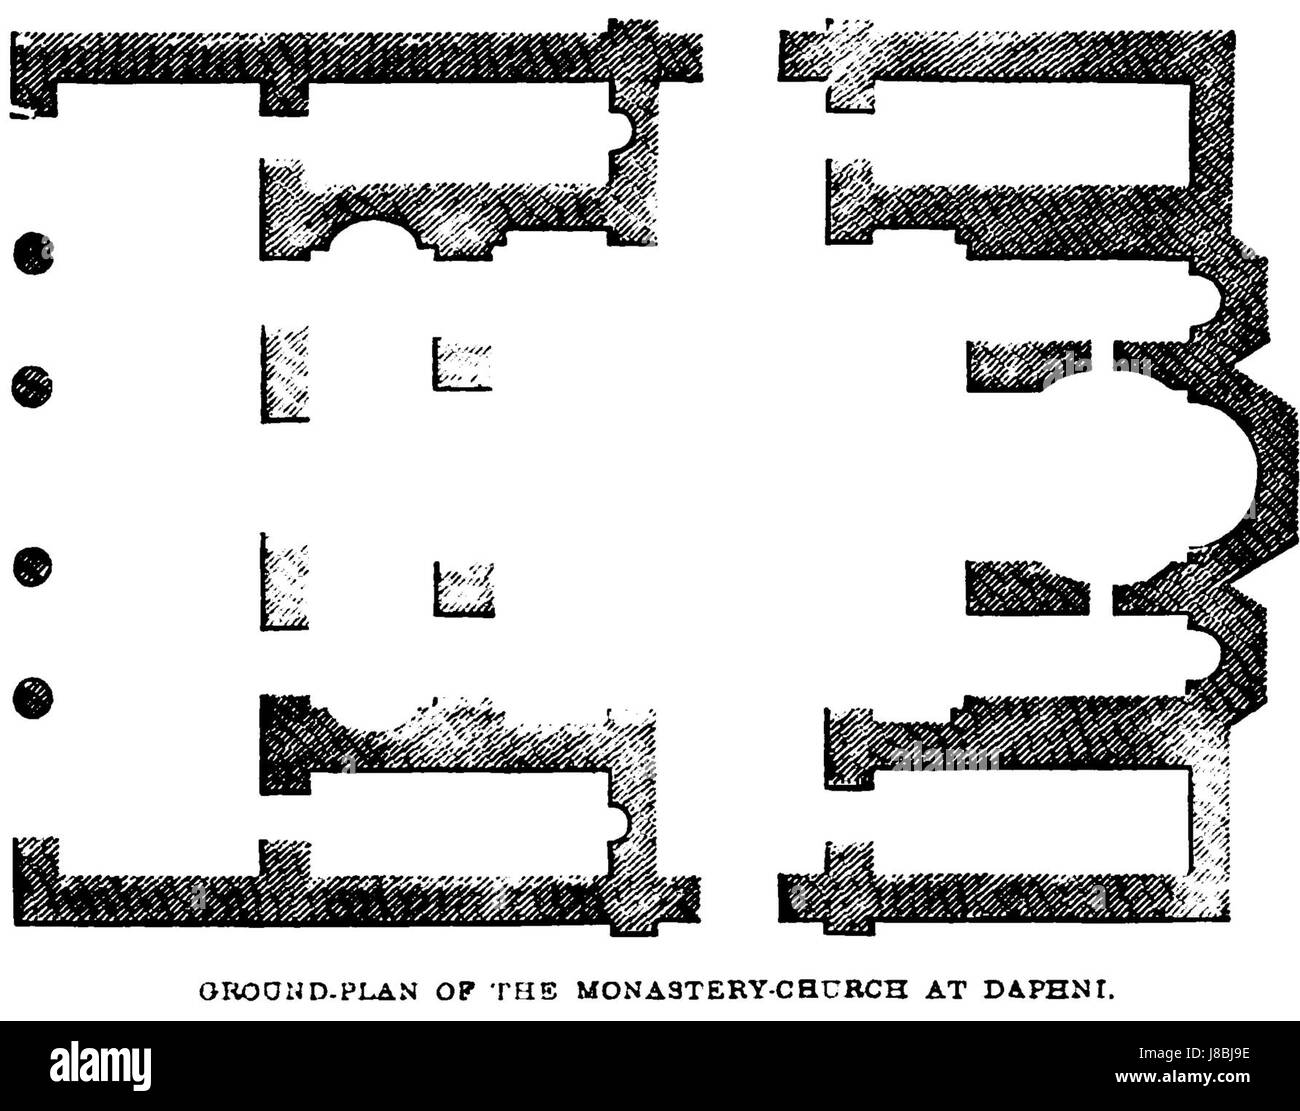 Ground.Plan of the Monastery Church at Daphni. John M. Neale. A history of the Holy Eastern Church. P.183 Stock Photo